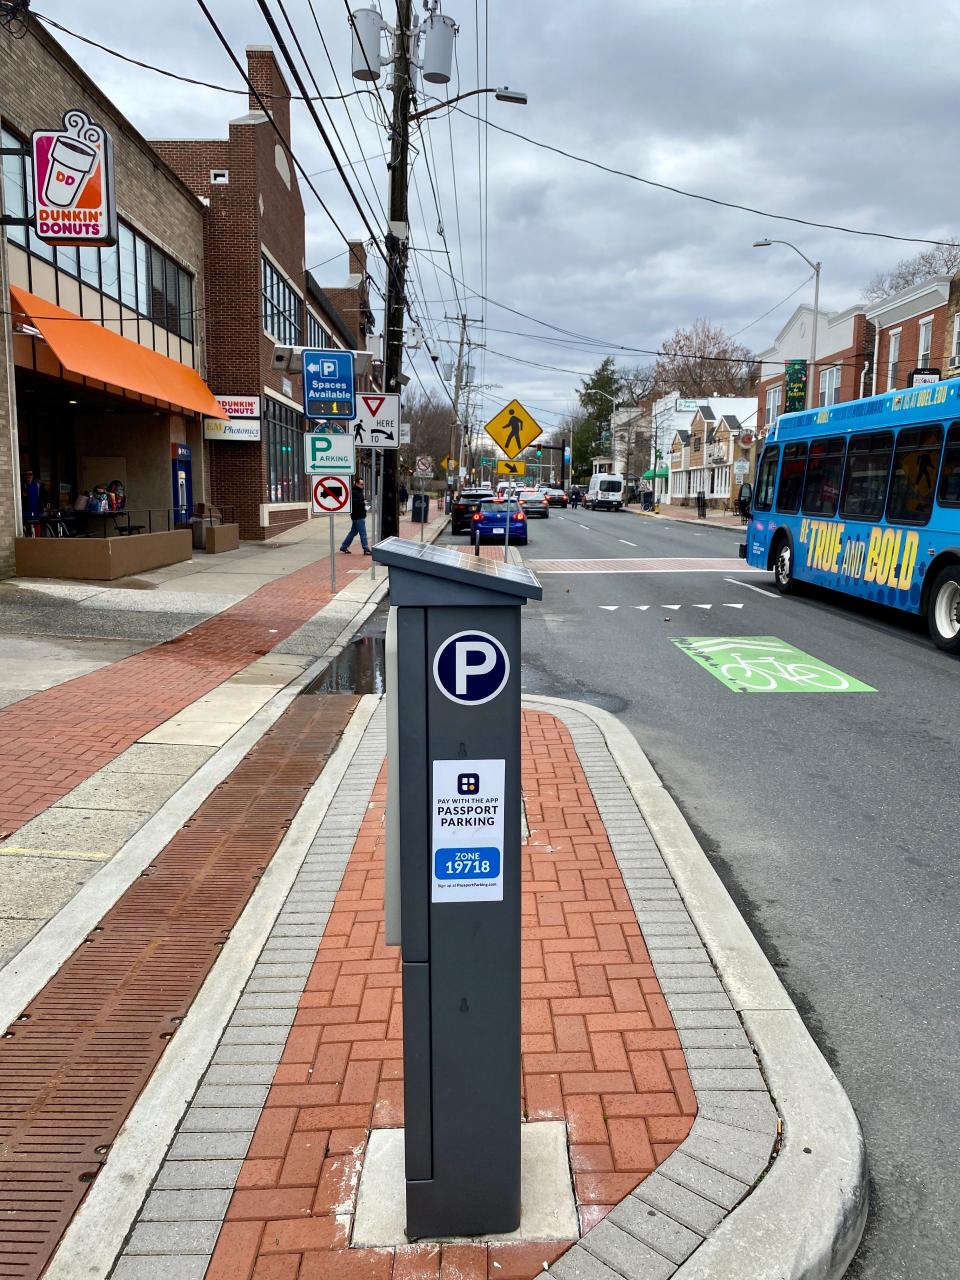 Newark's fine for an expired parking meter is nearly double that of any other city or town in the state.